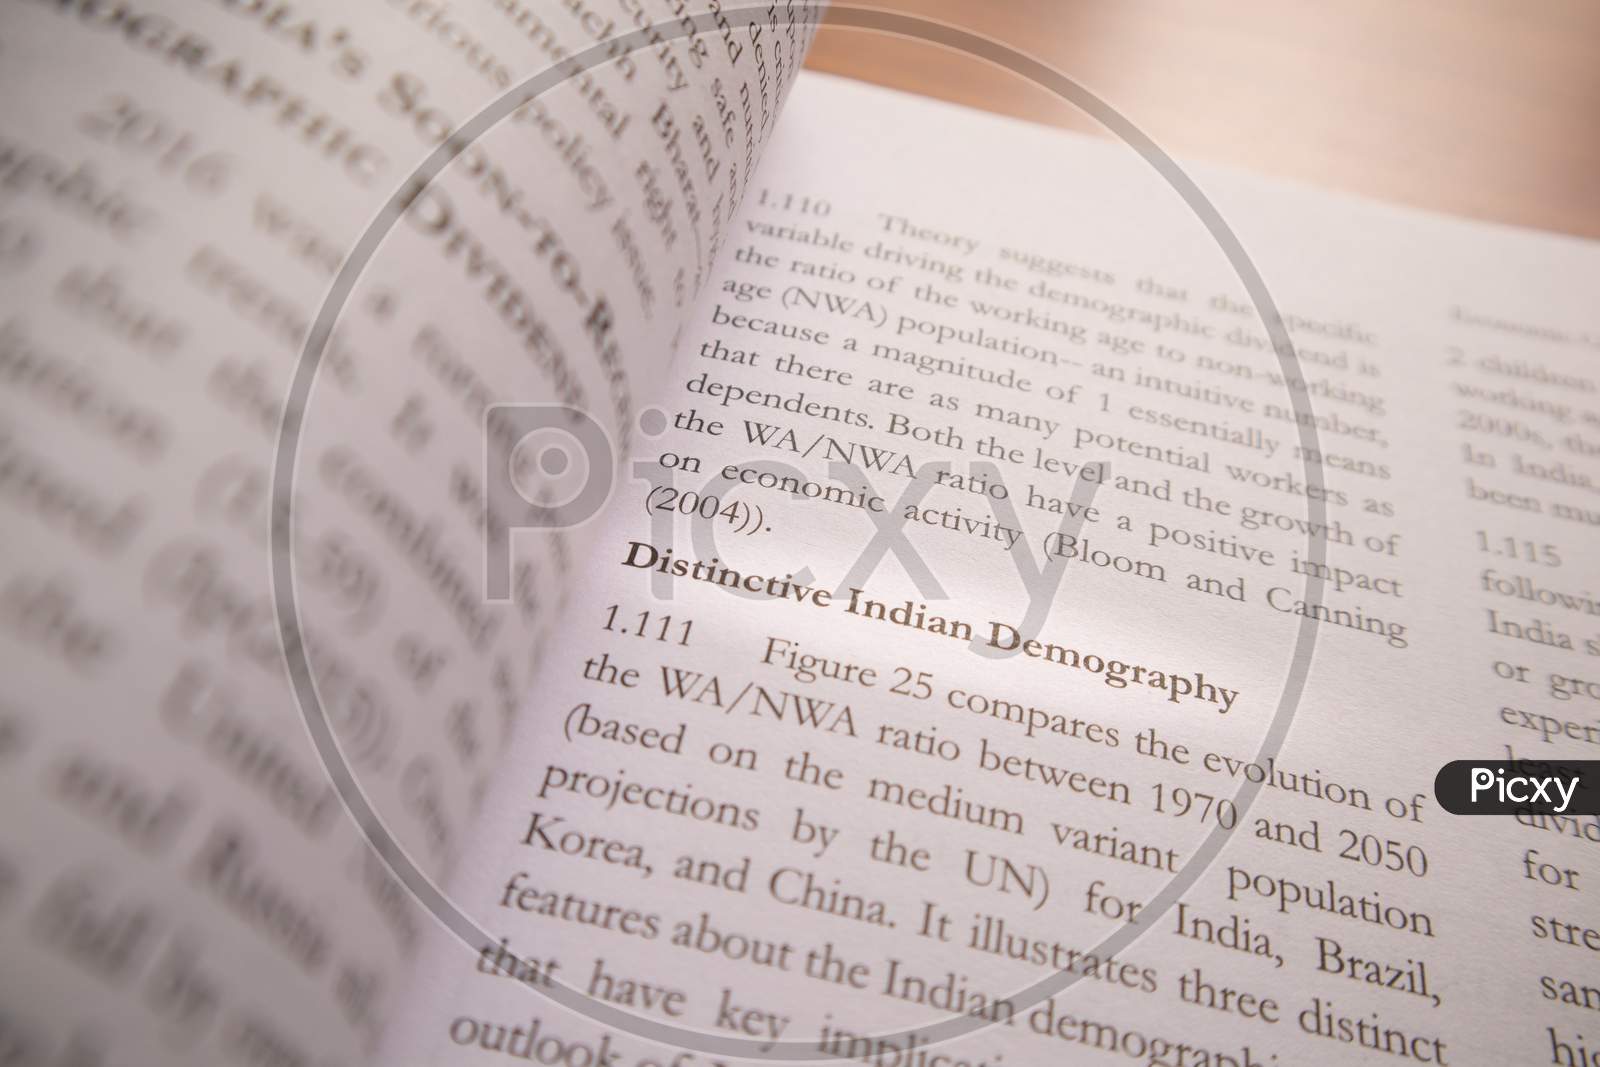 Distinctive Indian Demography Text printed on a White Paper